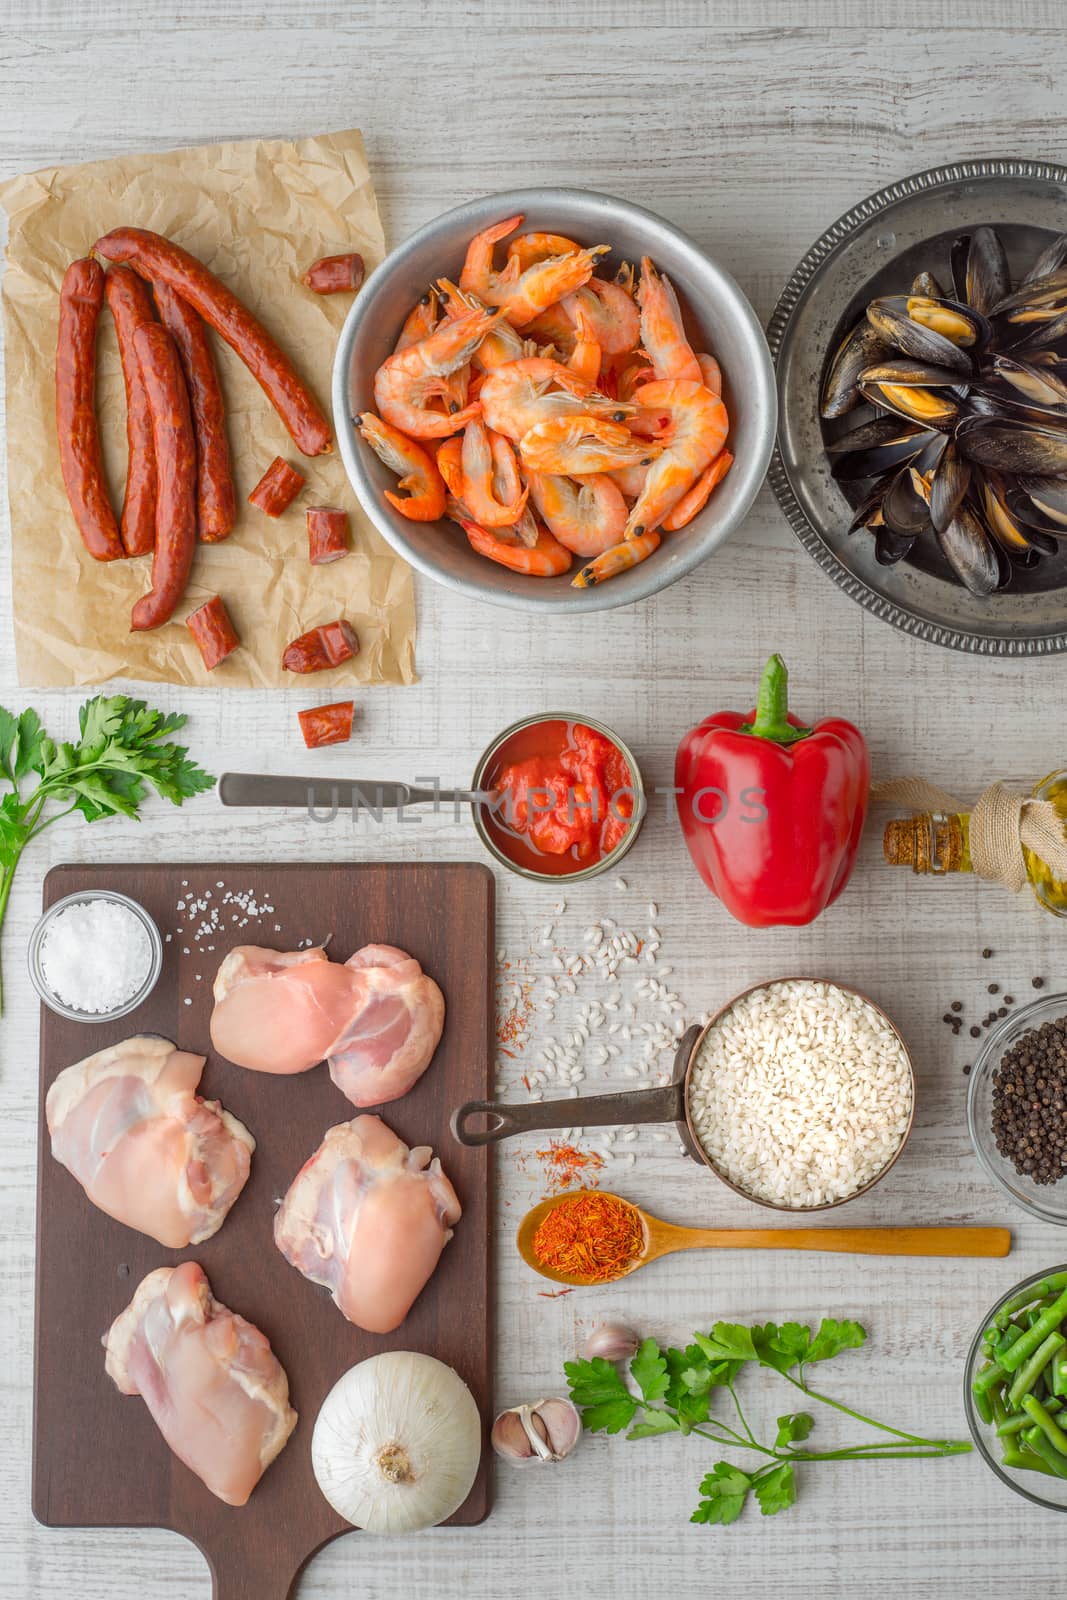 Ingredients for paella on the white  table vertical by Deniskarpenkov